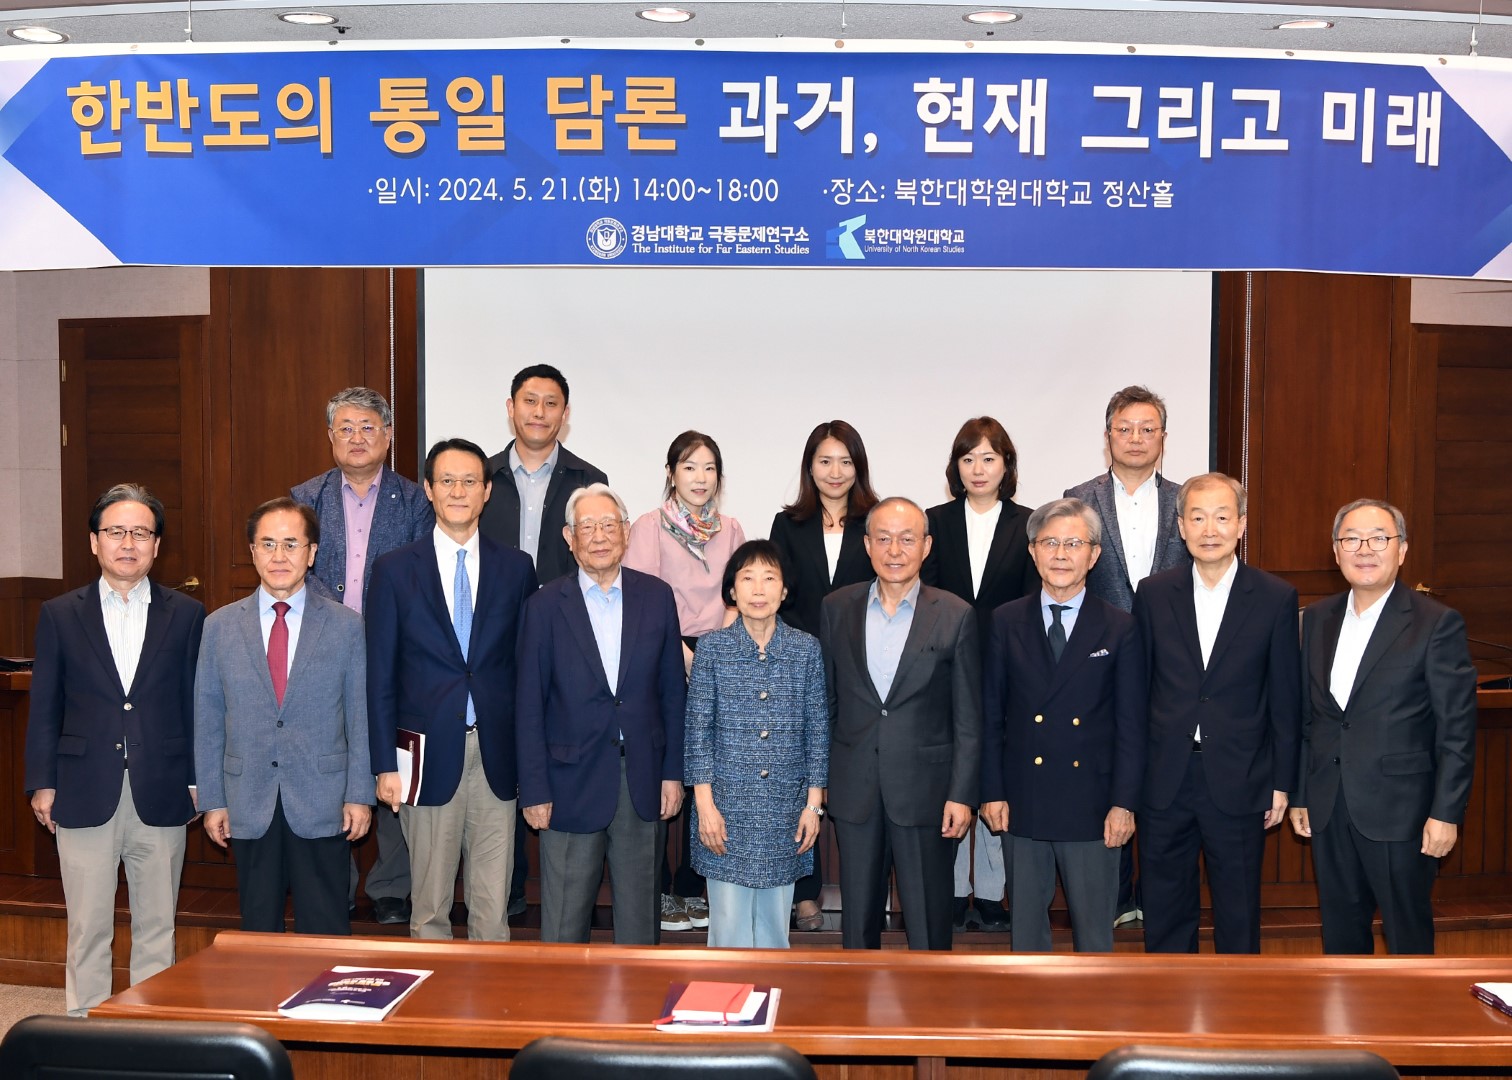 IFES-UNKS Conference on ‘Discourses of Unification on the Korean Peninsula’ 첨부 이미지